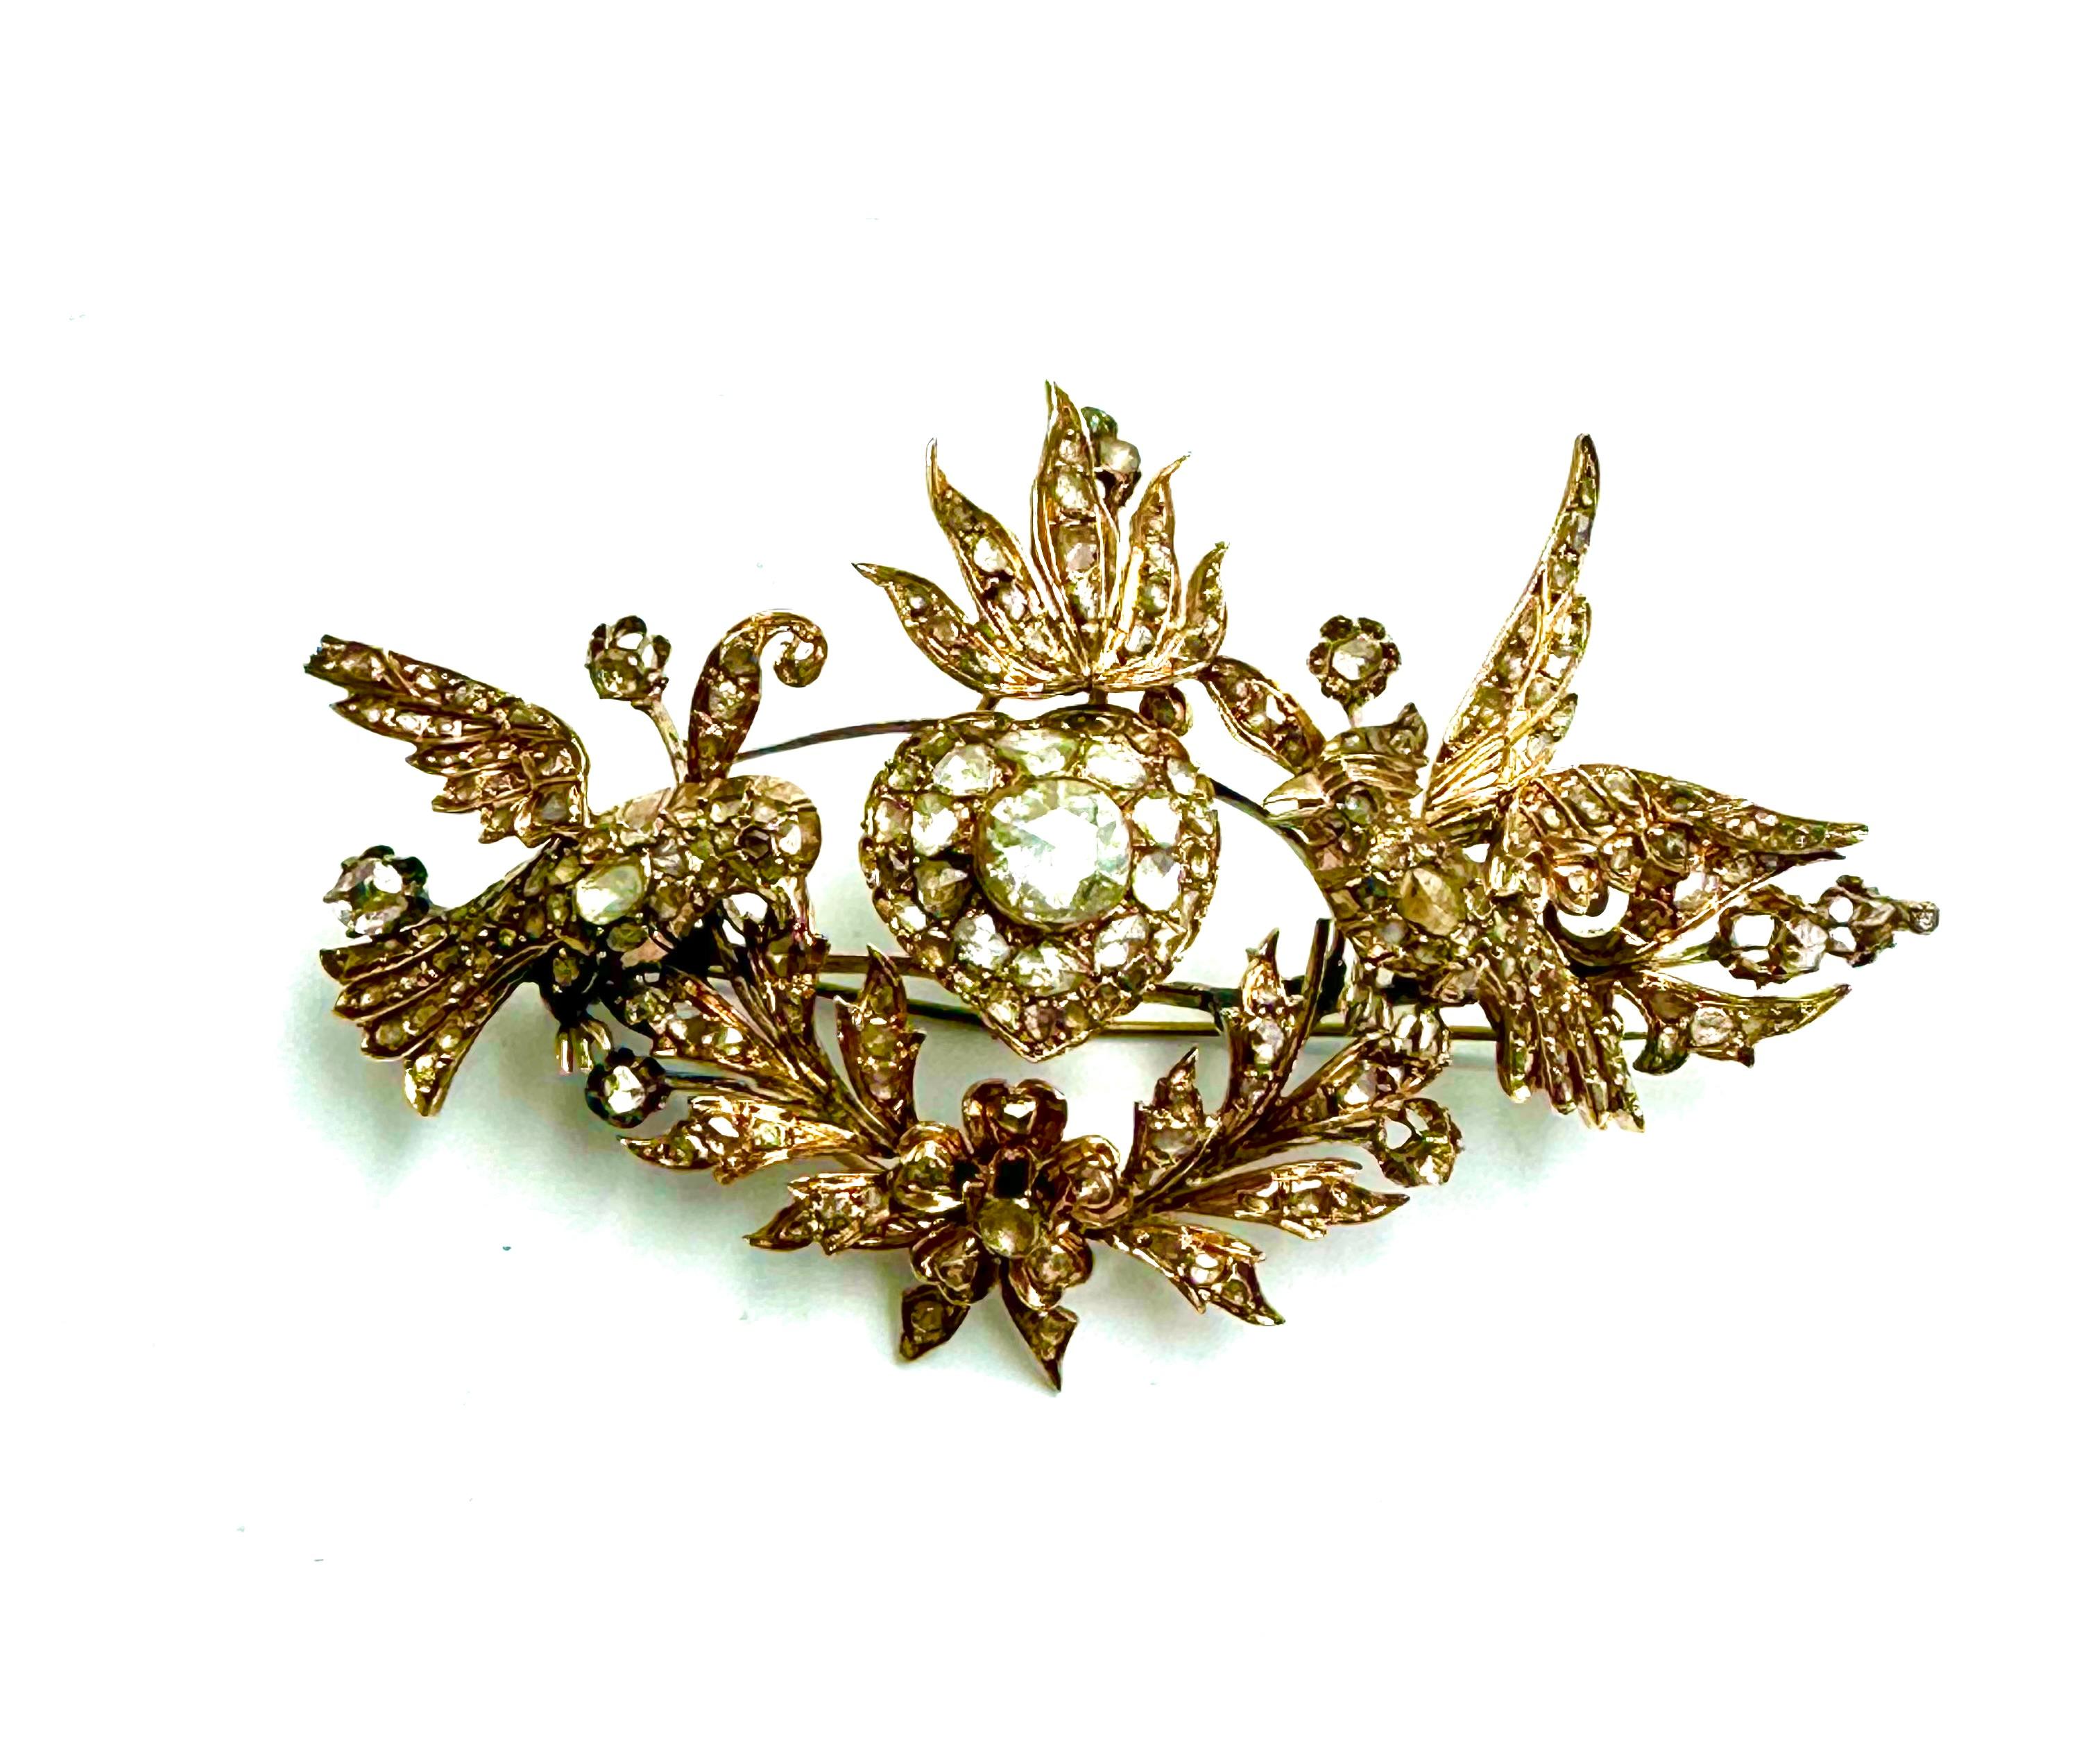 Fabulous set consisting of pendant-brooch and ring from the Austro-Hungarian Empire period.
The ring, in the shape of a stylized lily, is embellished with natural 